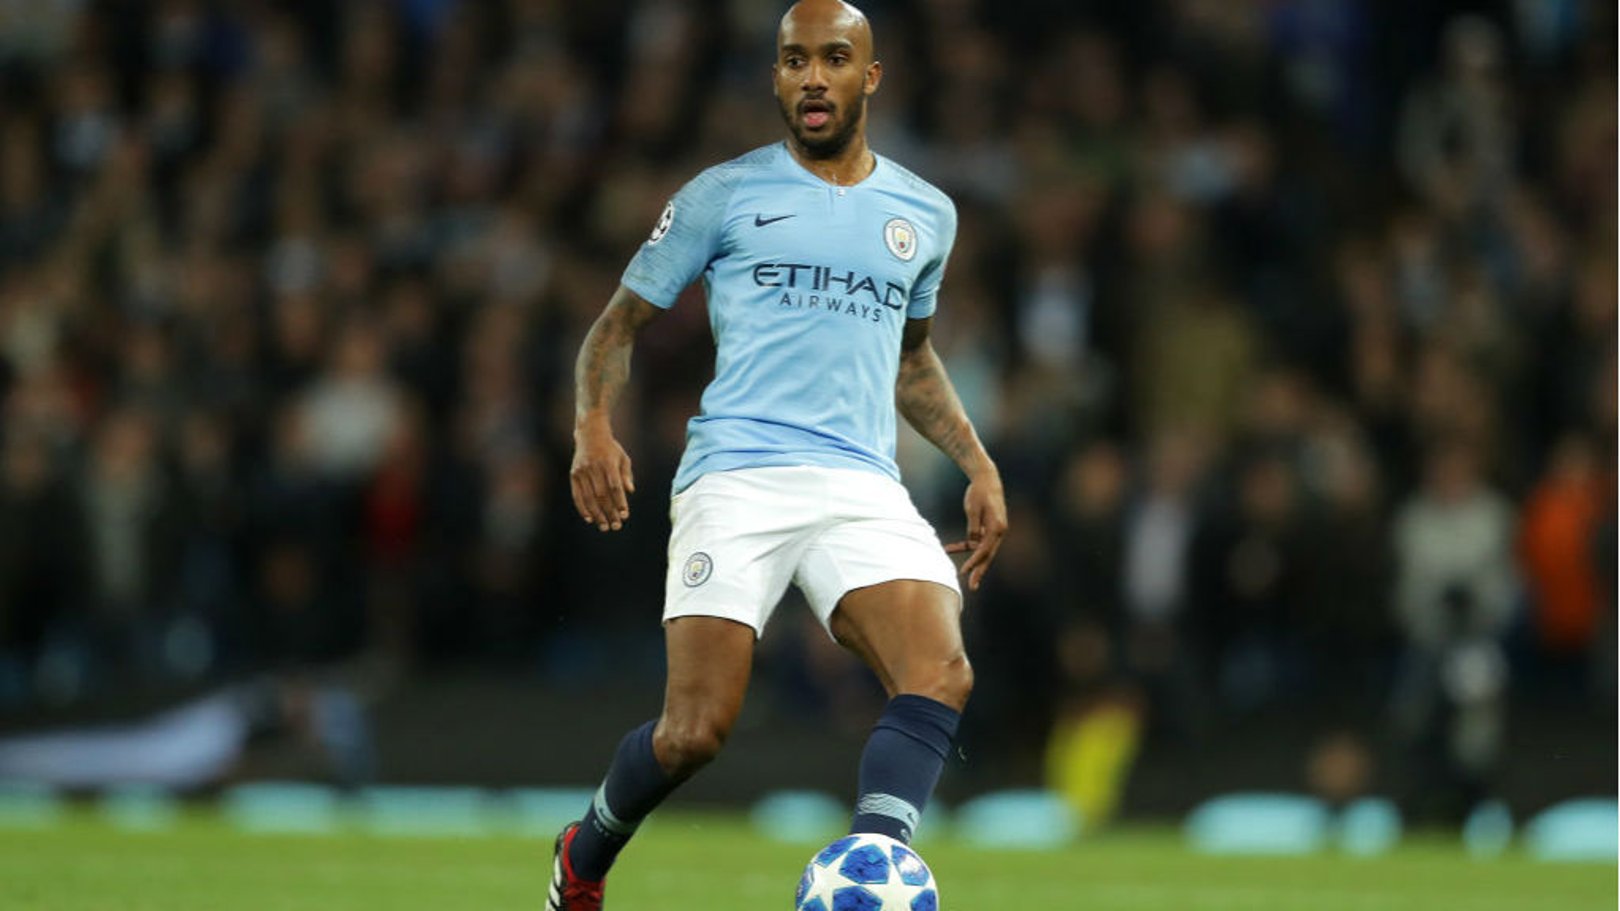 BEST FOOT FORWARD: Fabian Delph has emerged as a key figure for both club and country